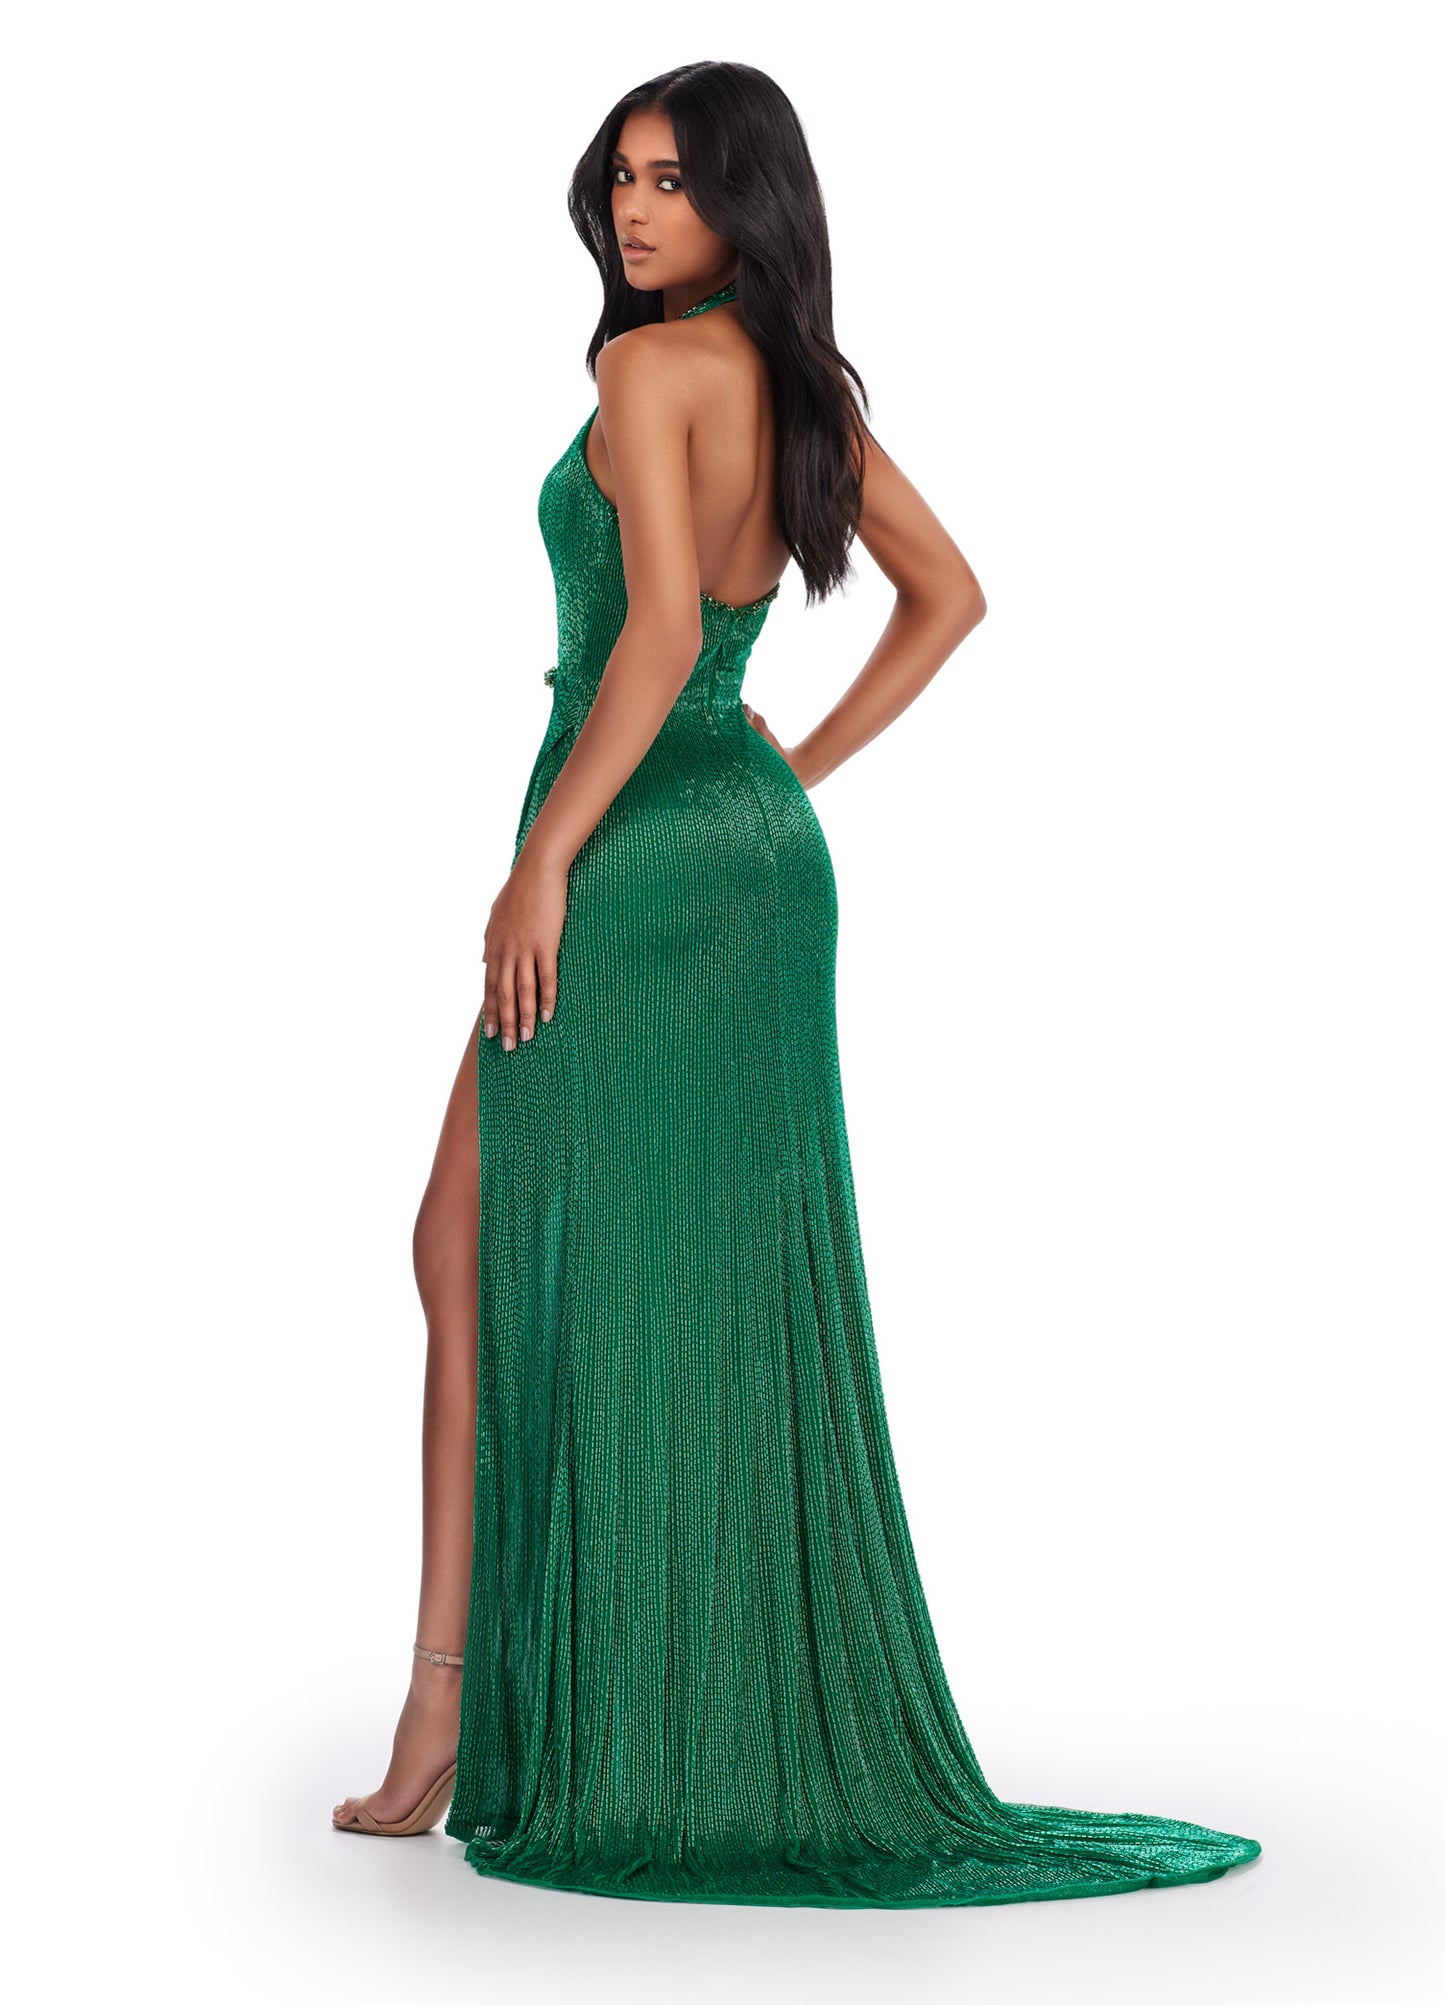 The Ashley Lauren 11547 Long Prom Dress is a stunning liquid beaded gown that is perfect for any formal occasion. Its open back and left leg slit add a touch of elegance, while the high-quality construction ensures a comfortable and flattering fit. Make a statement and turn heads with this gorgeous pageant gown. Plunging v-neckline liquid beaded gown with high left leg slit.